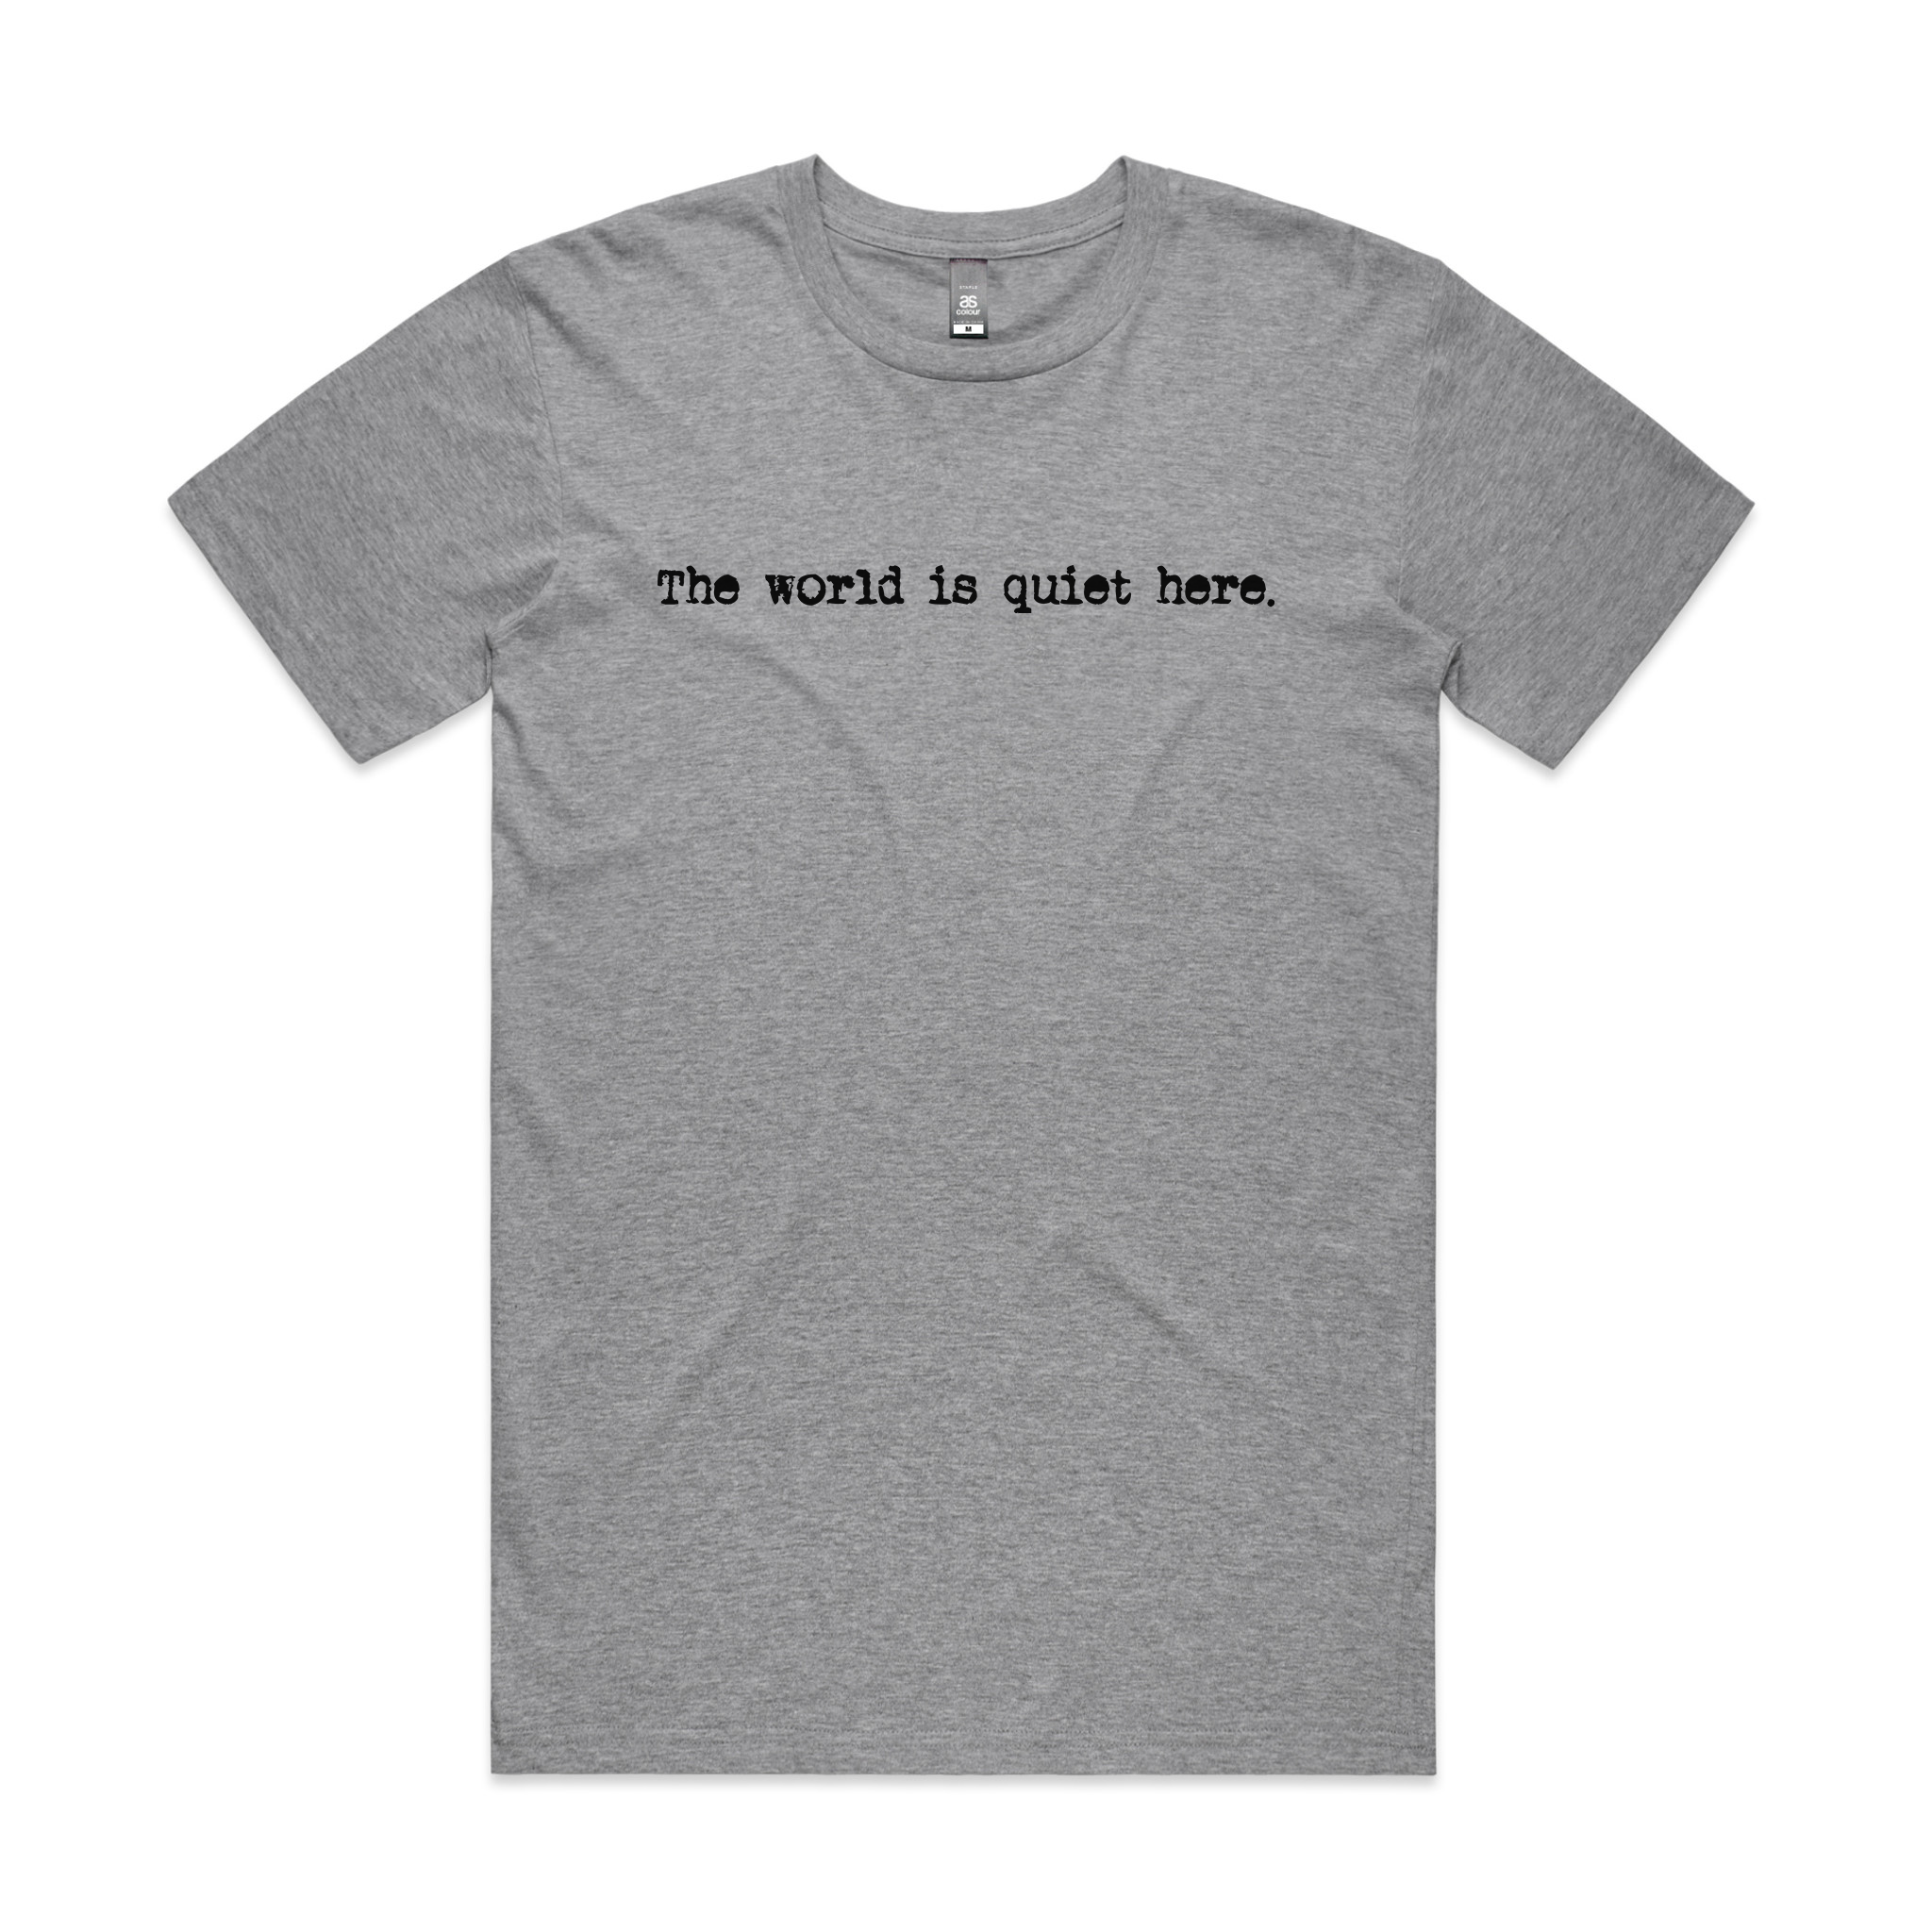 The World Is Quiet Here Tee